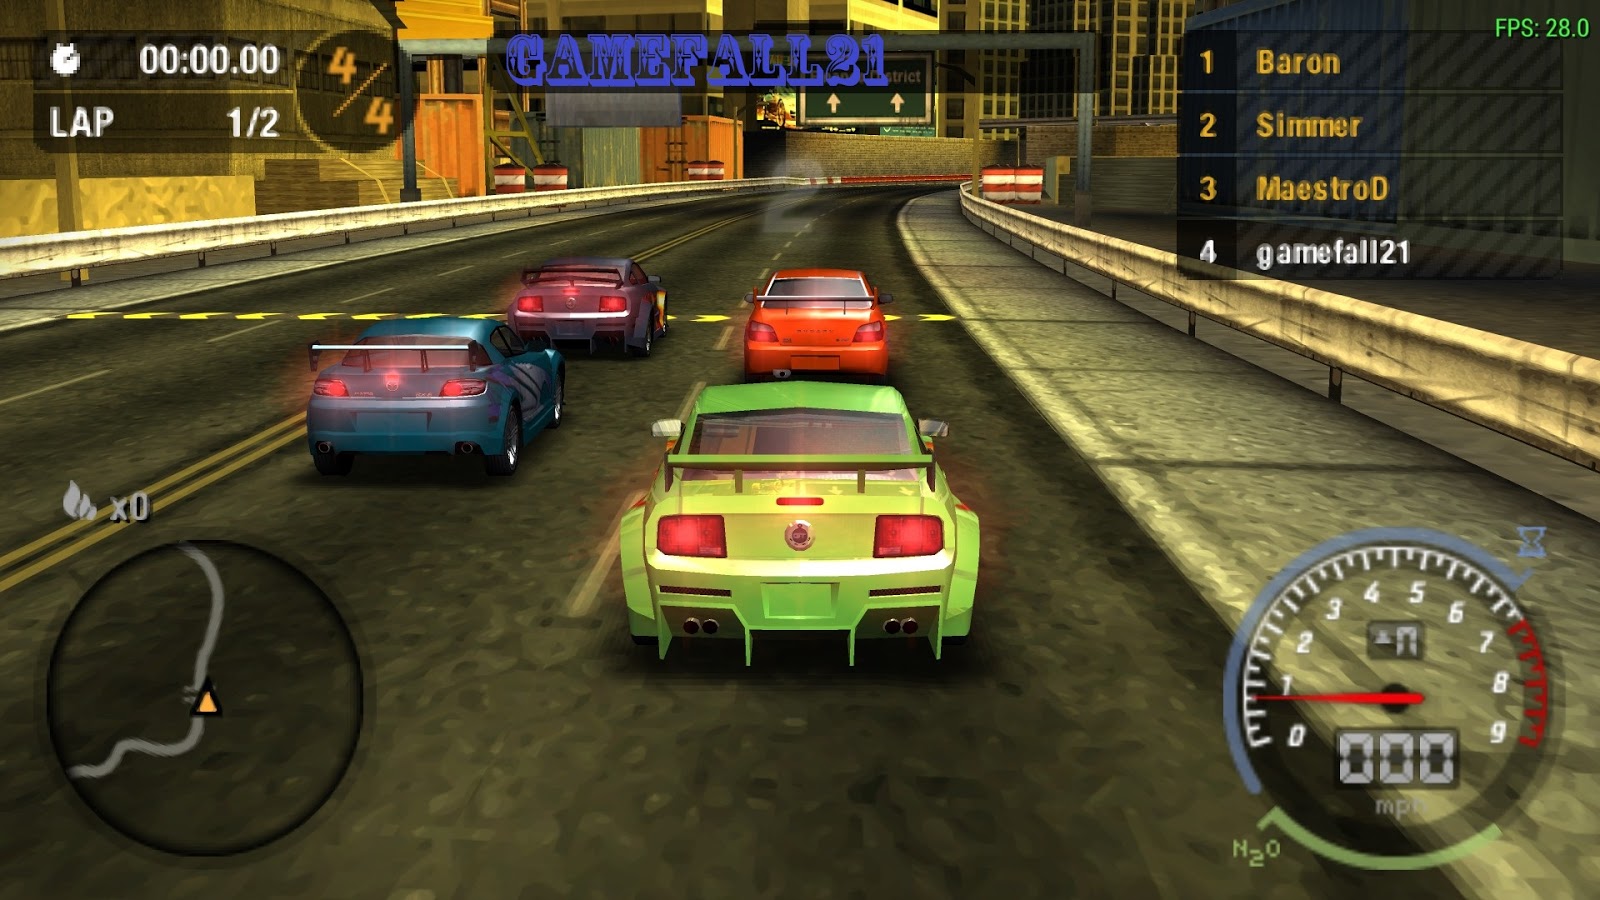 Download need for speed shift psp ppsspp iso high compressed windows 7